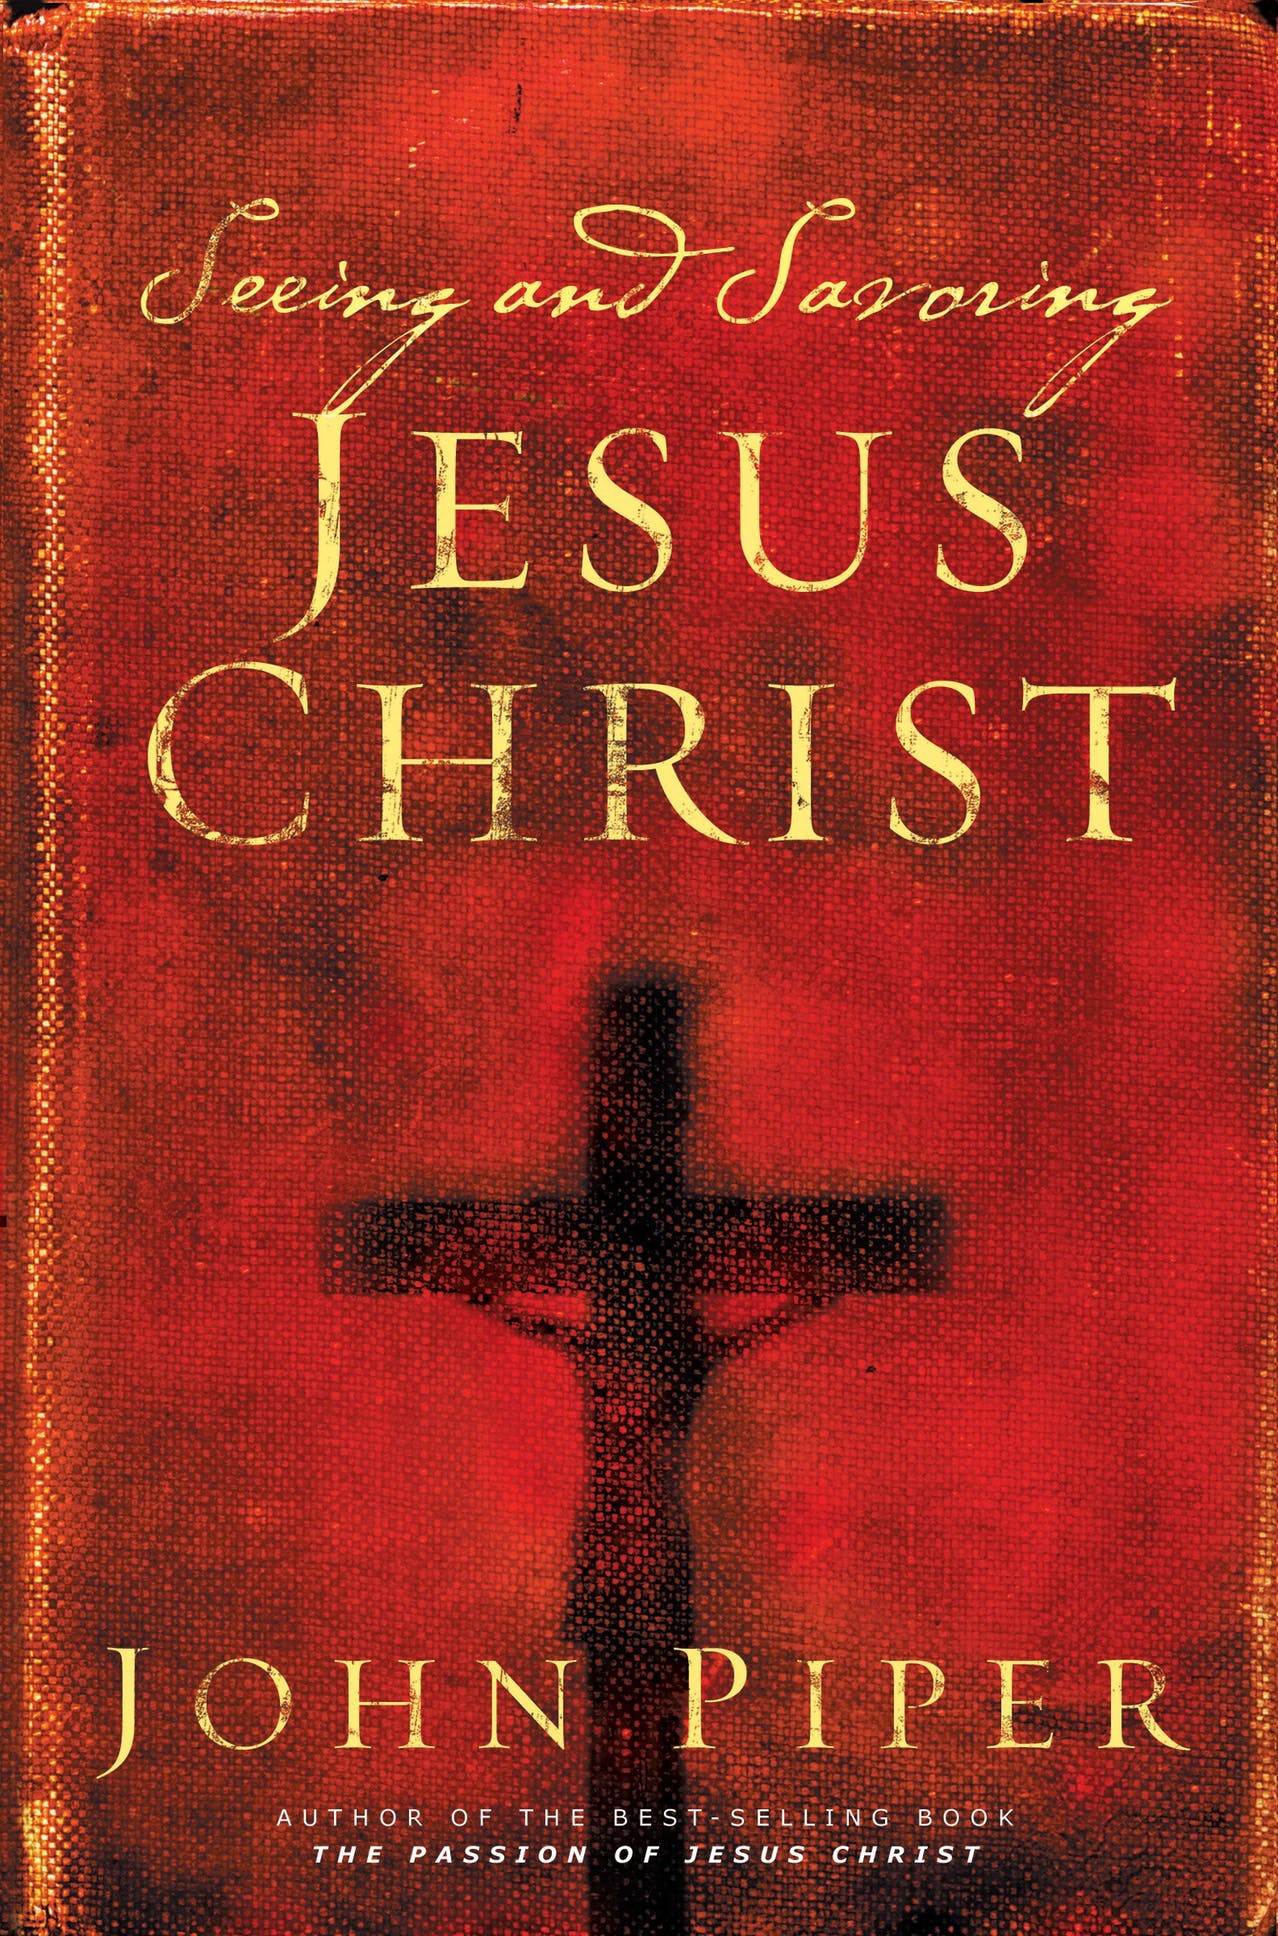 You are currently viewing Book of the Month Fellowship—Seeing and Savoring Jesus Christ